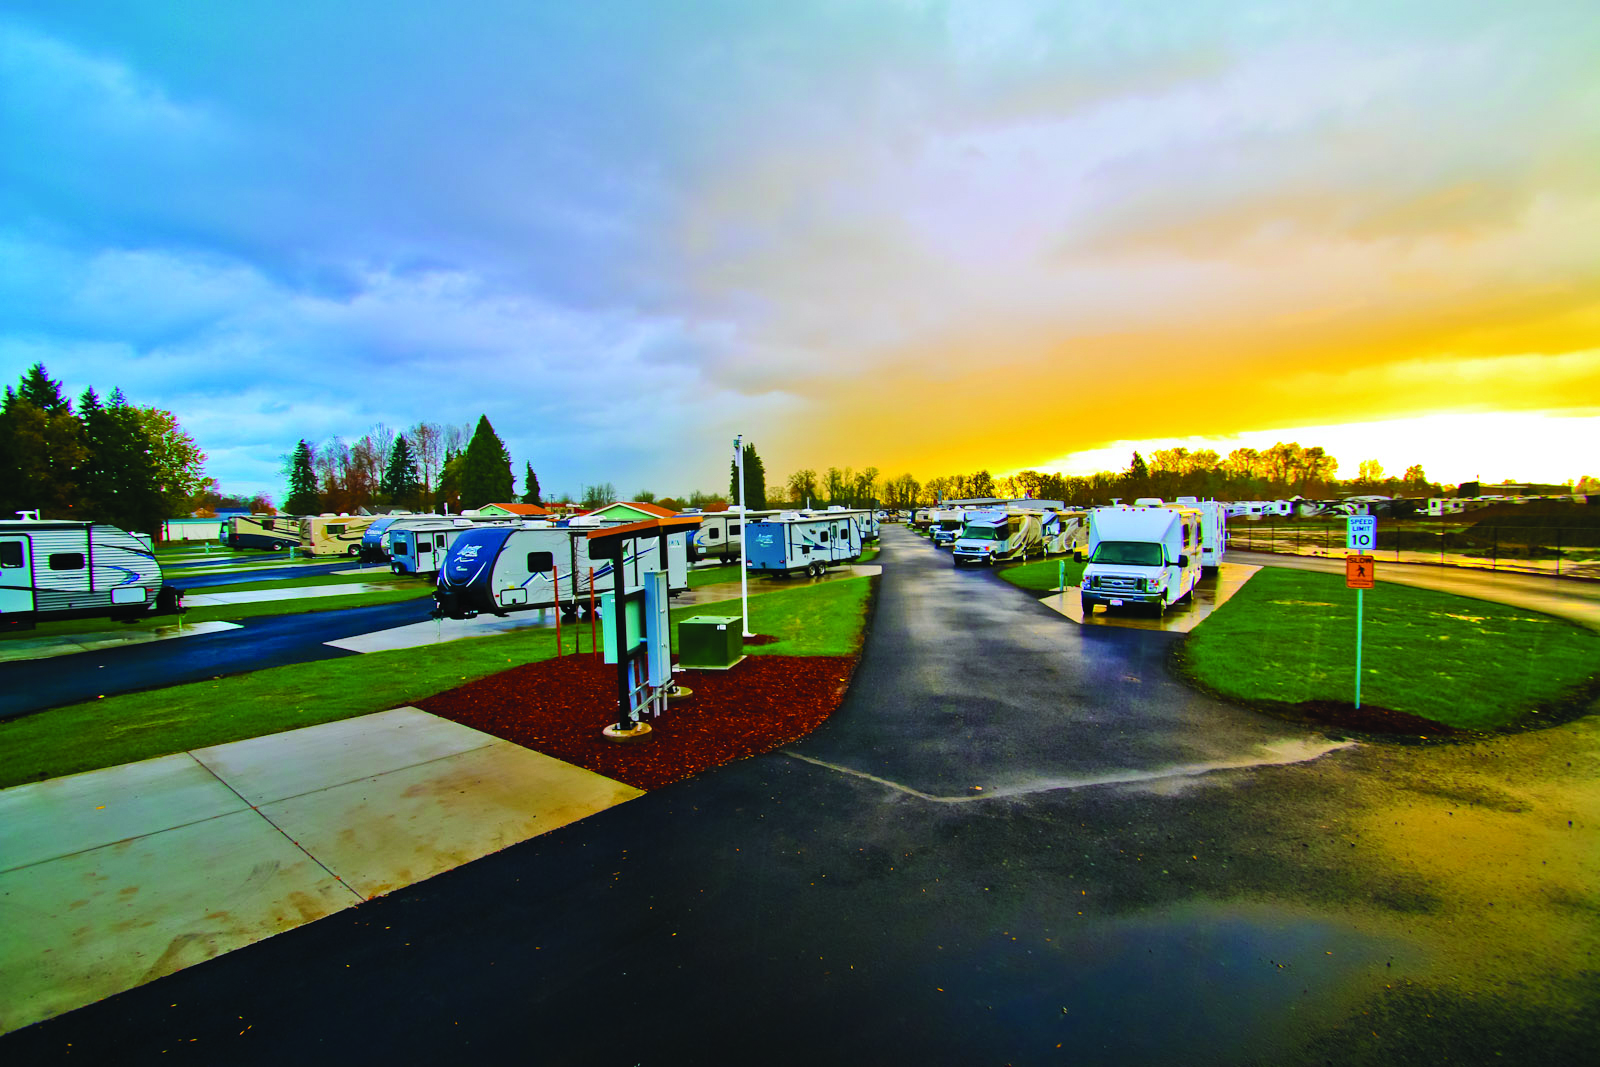 Sunset picture of RV's parked at Guaranty RV Park